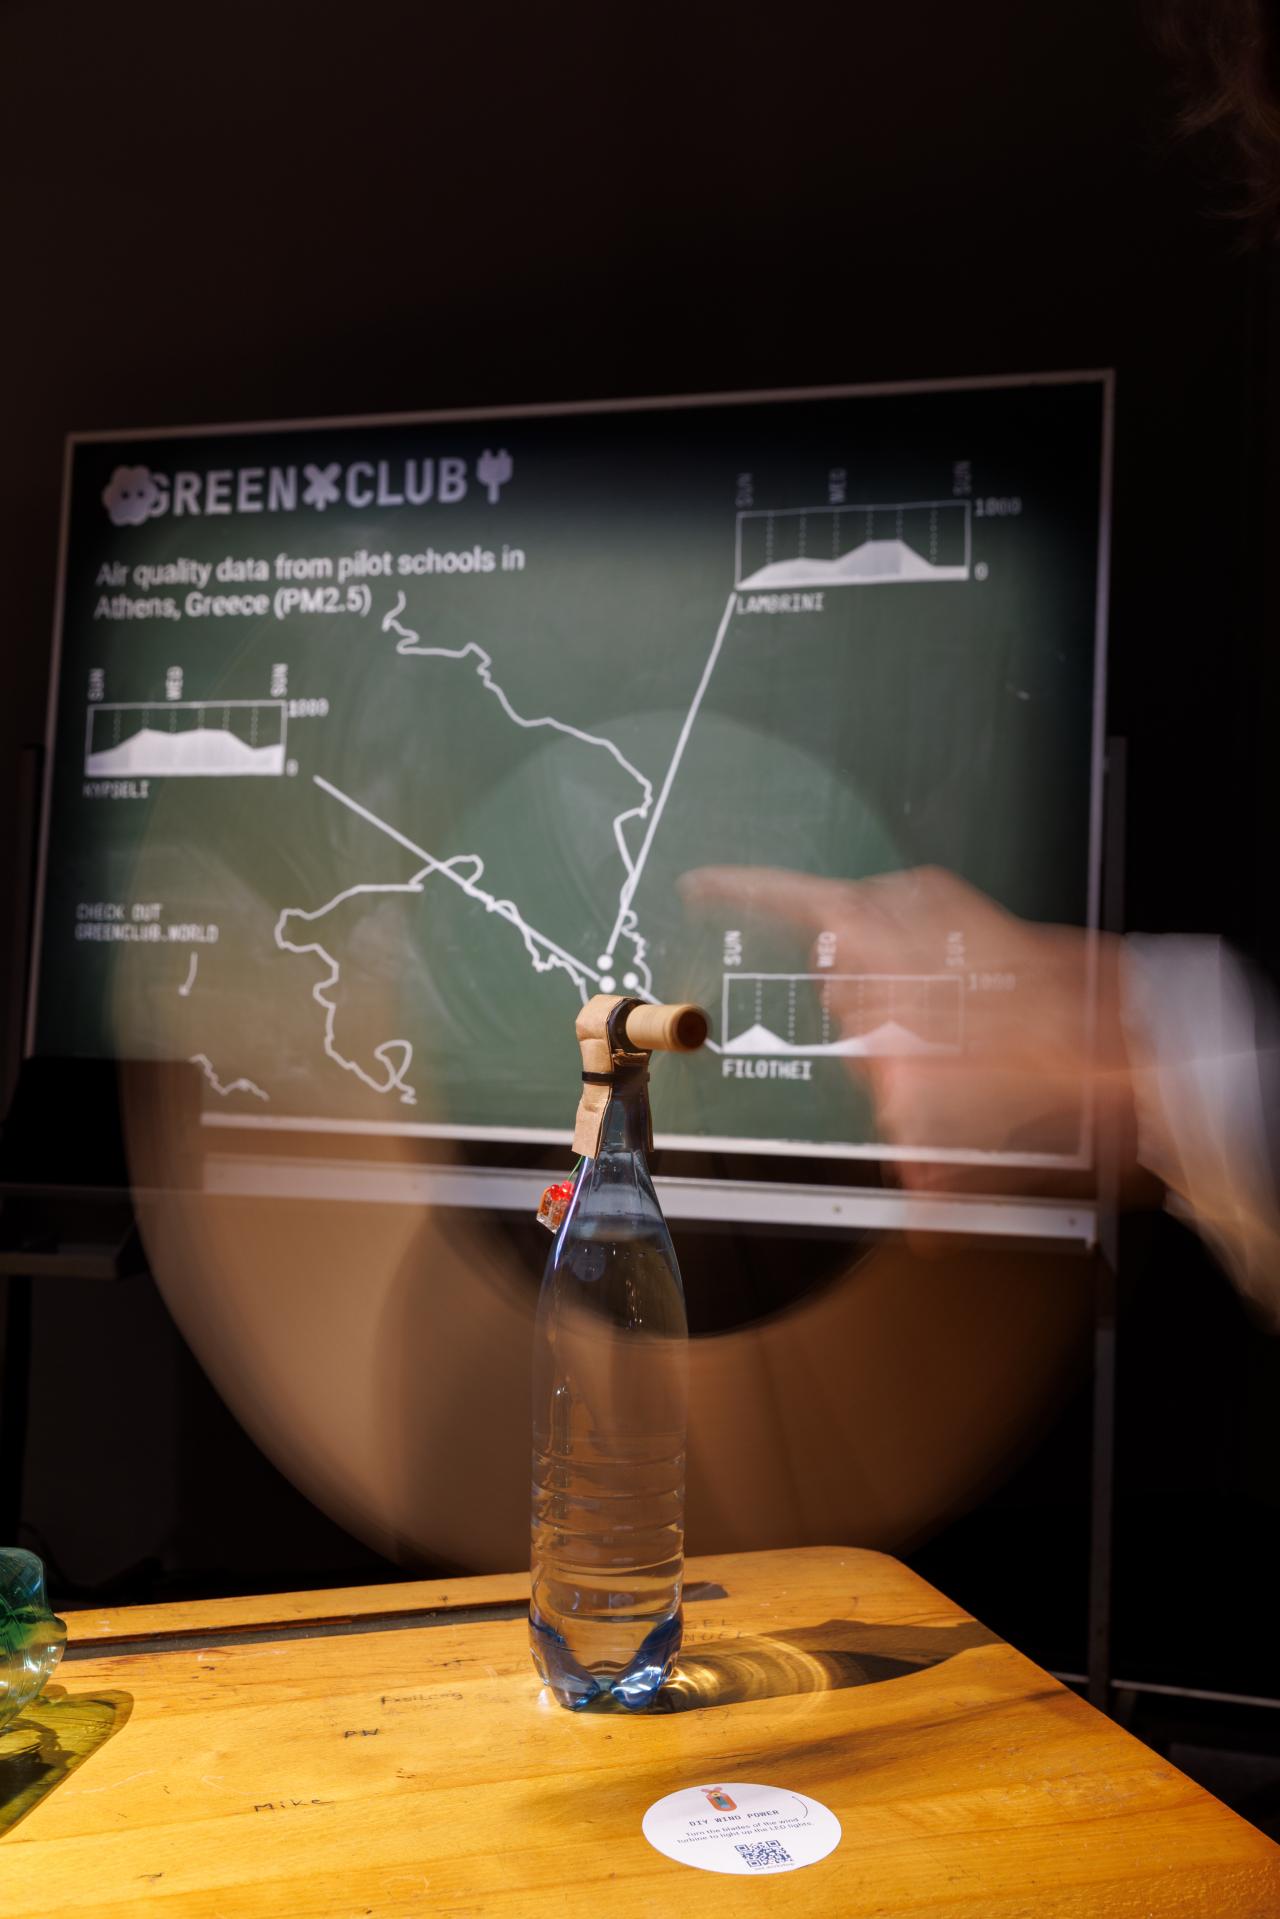 In the foreground there is a glass bottle on which a kind of tube was fixed. In the background there is a board with statistics.